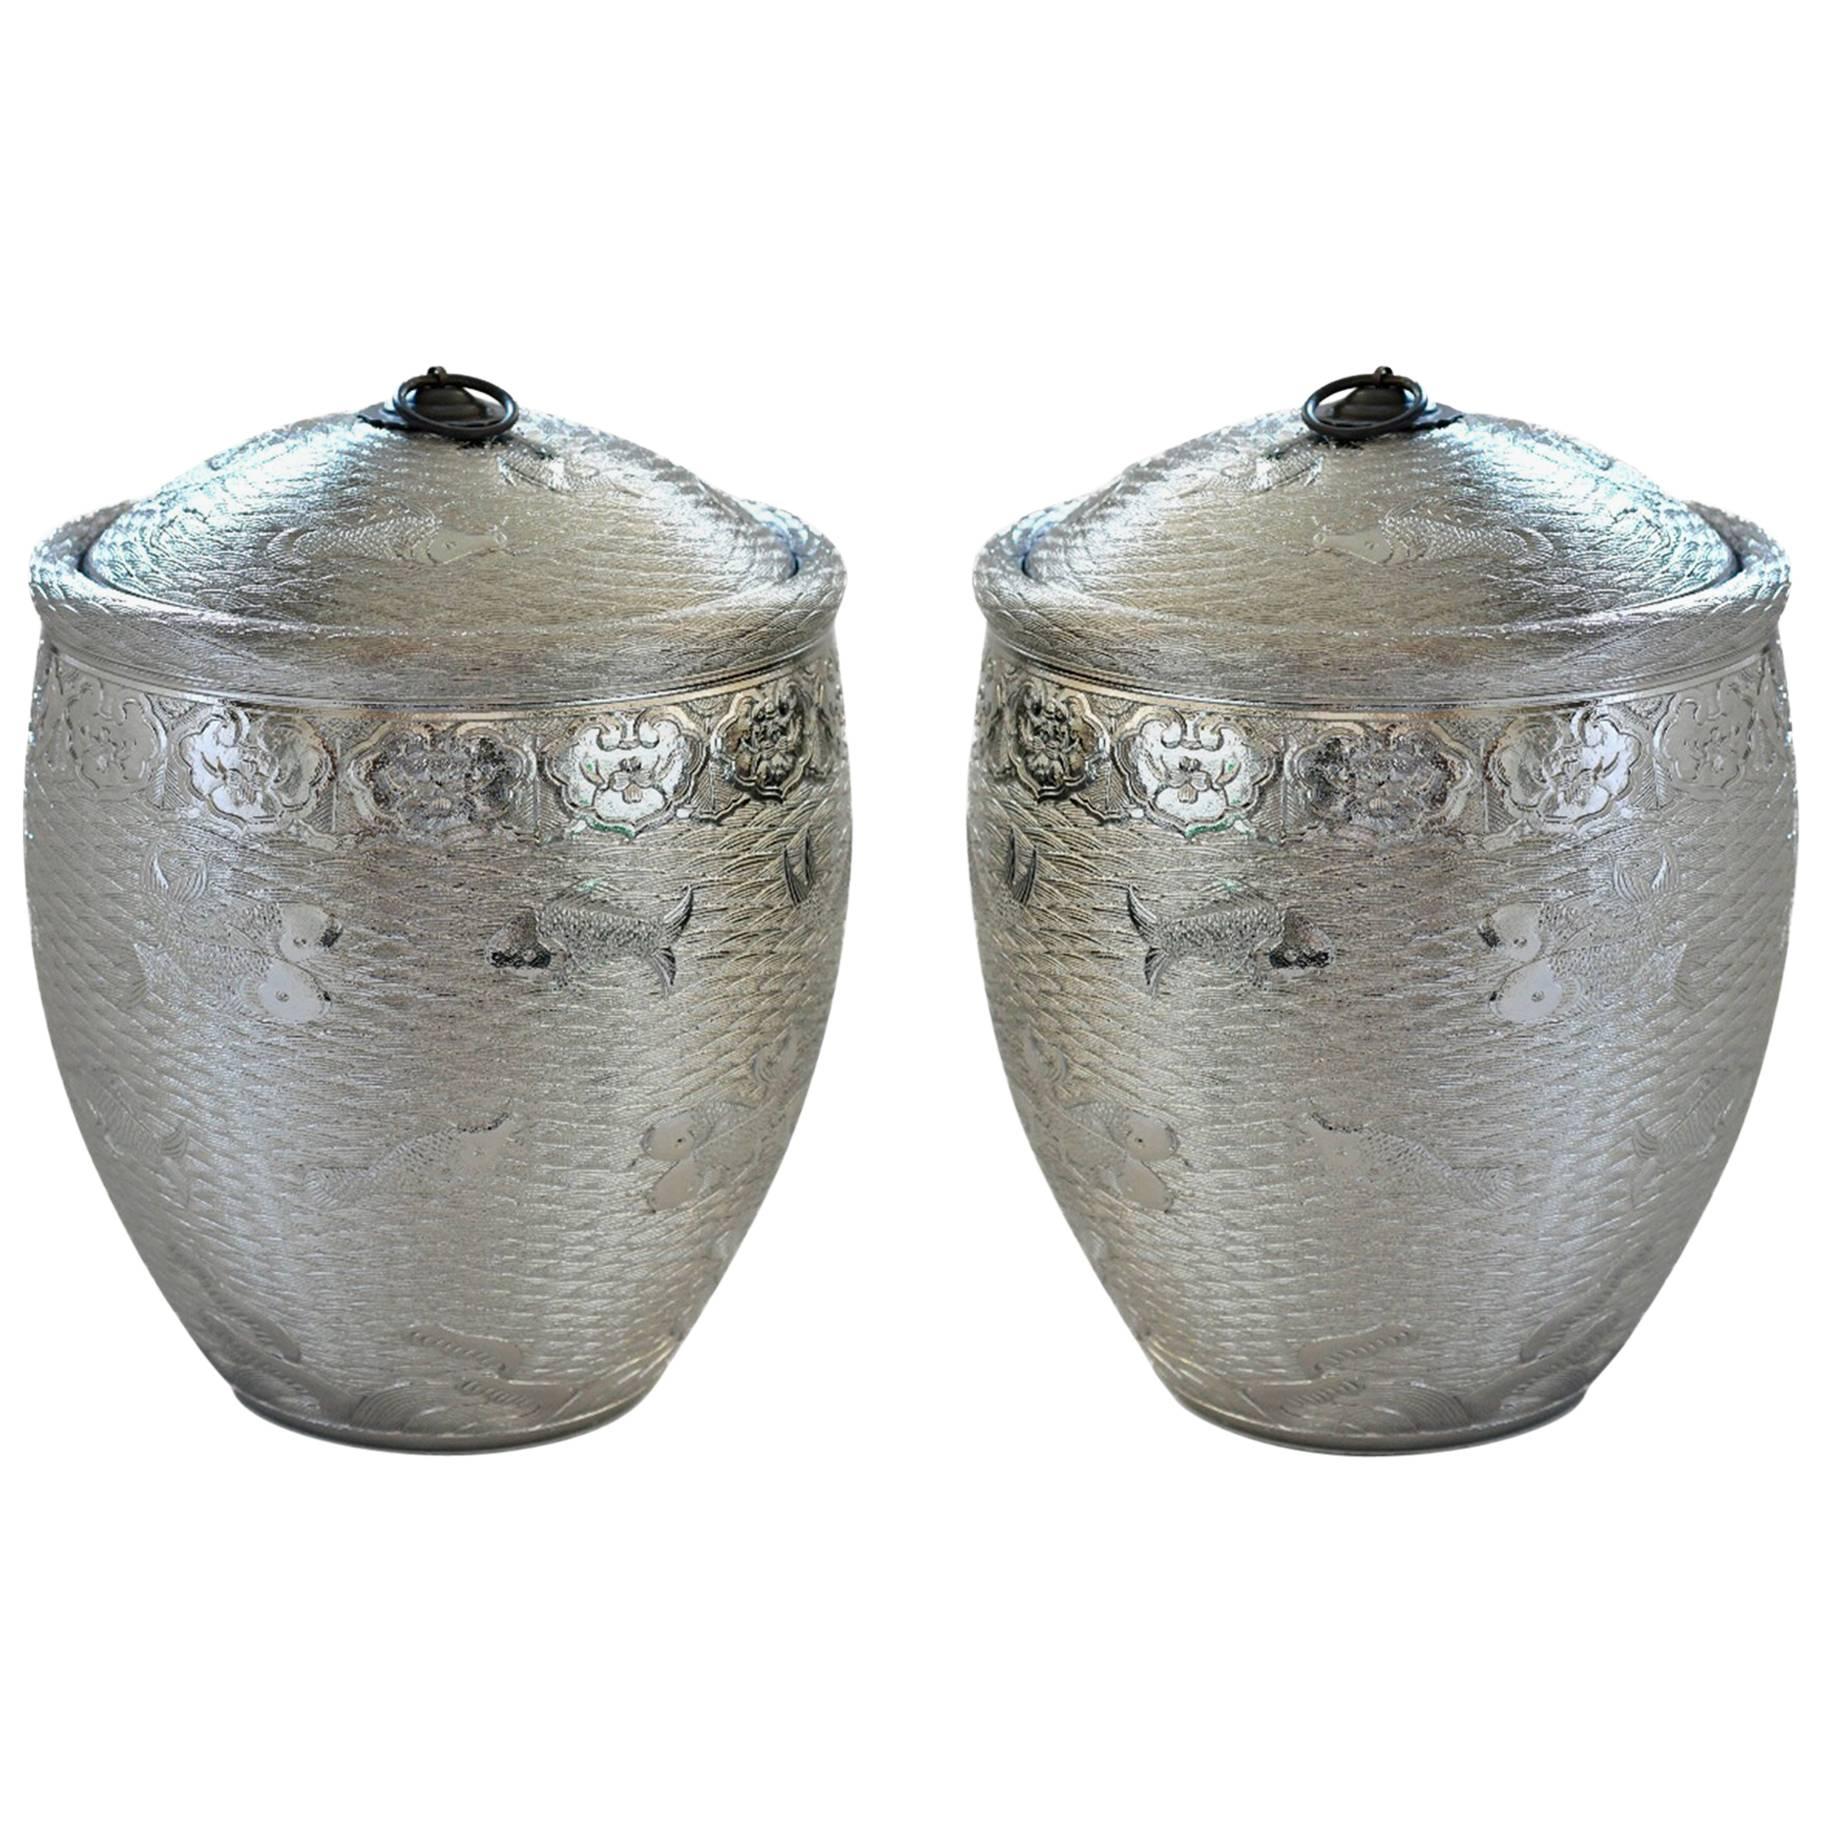 Pair of Fine Carved Silver Glazed Porcelain Jars with Covers